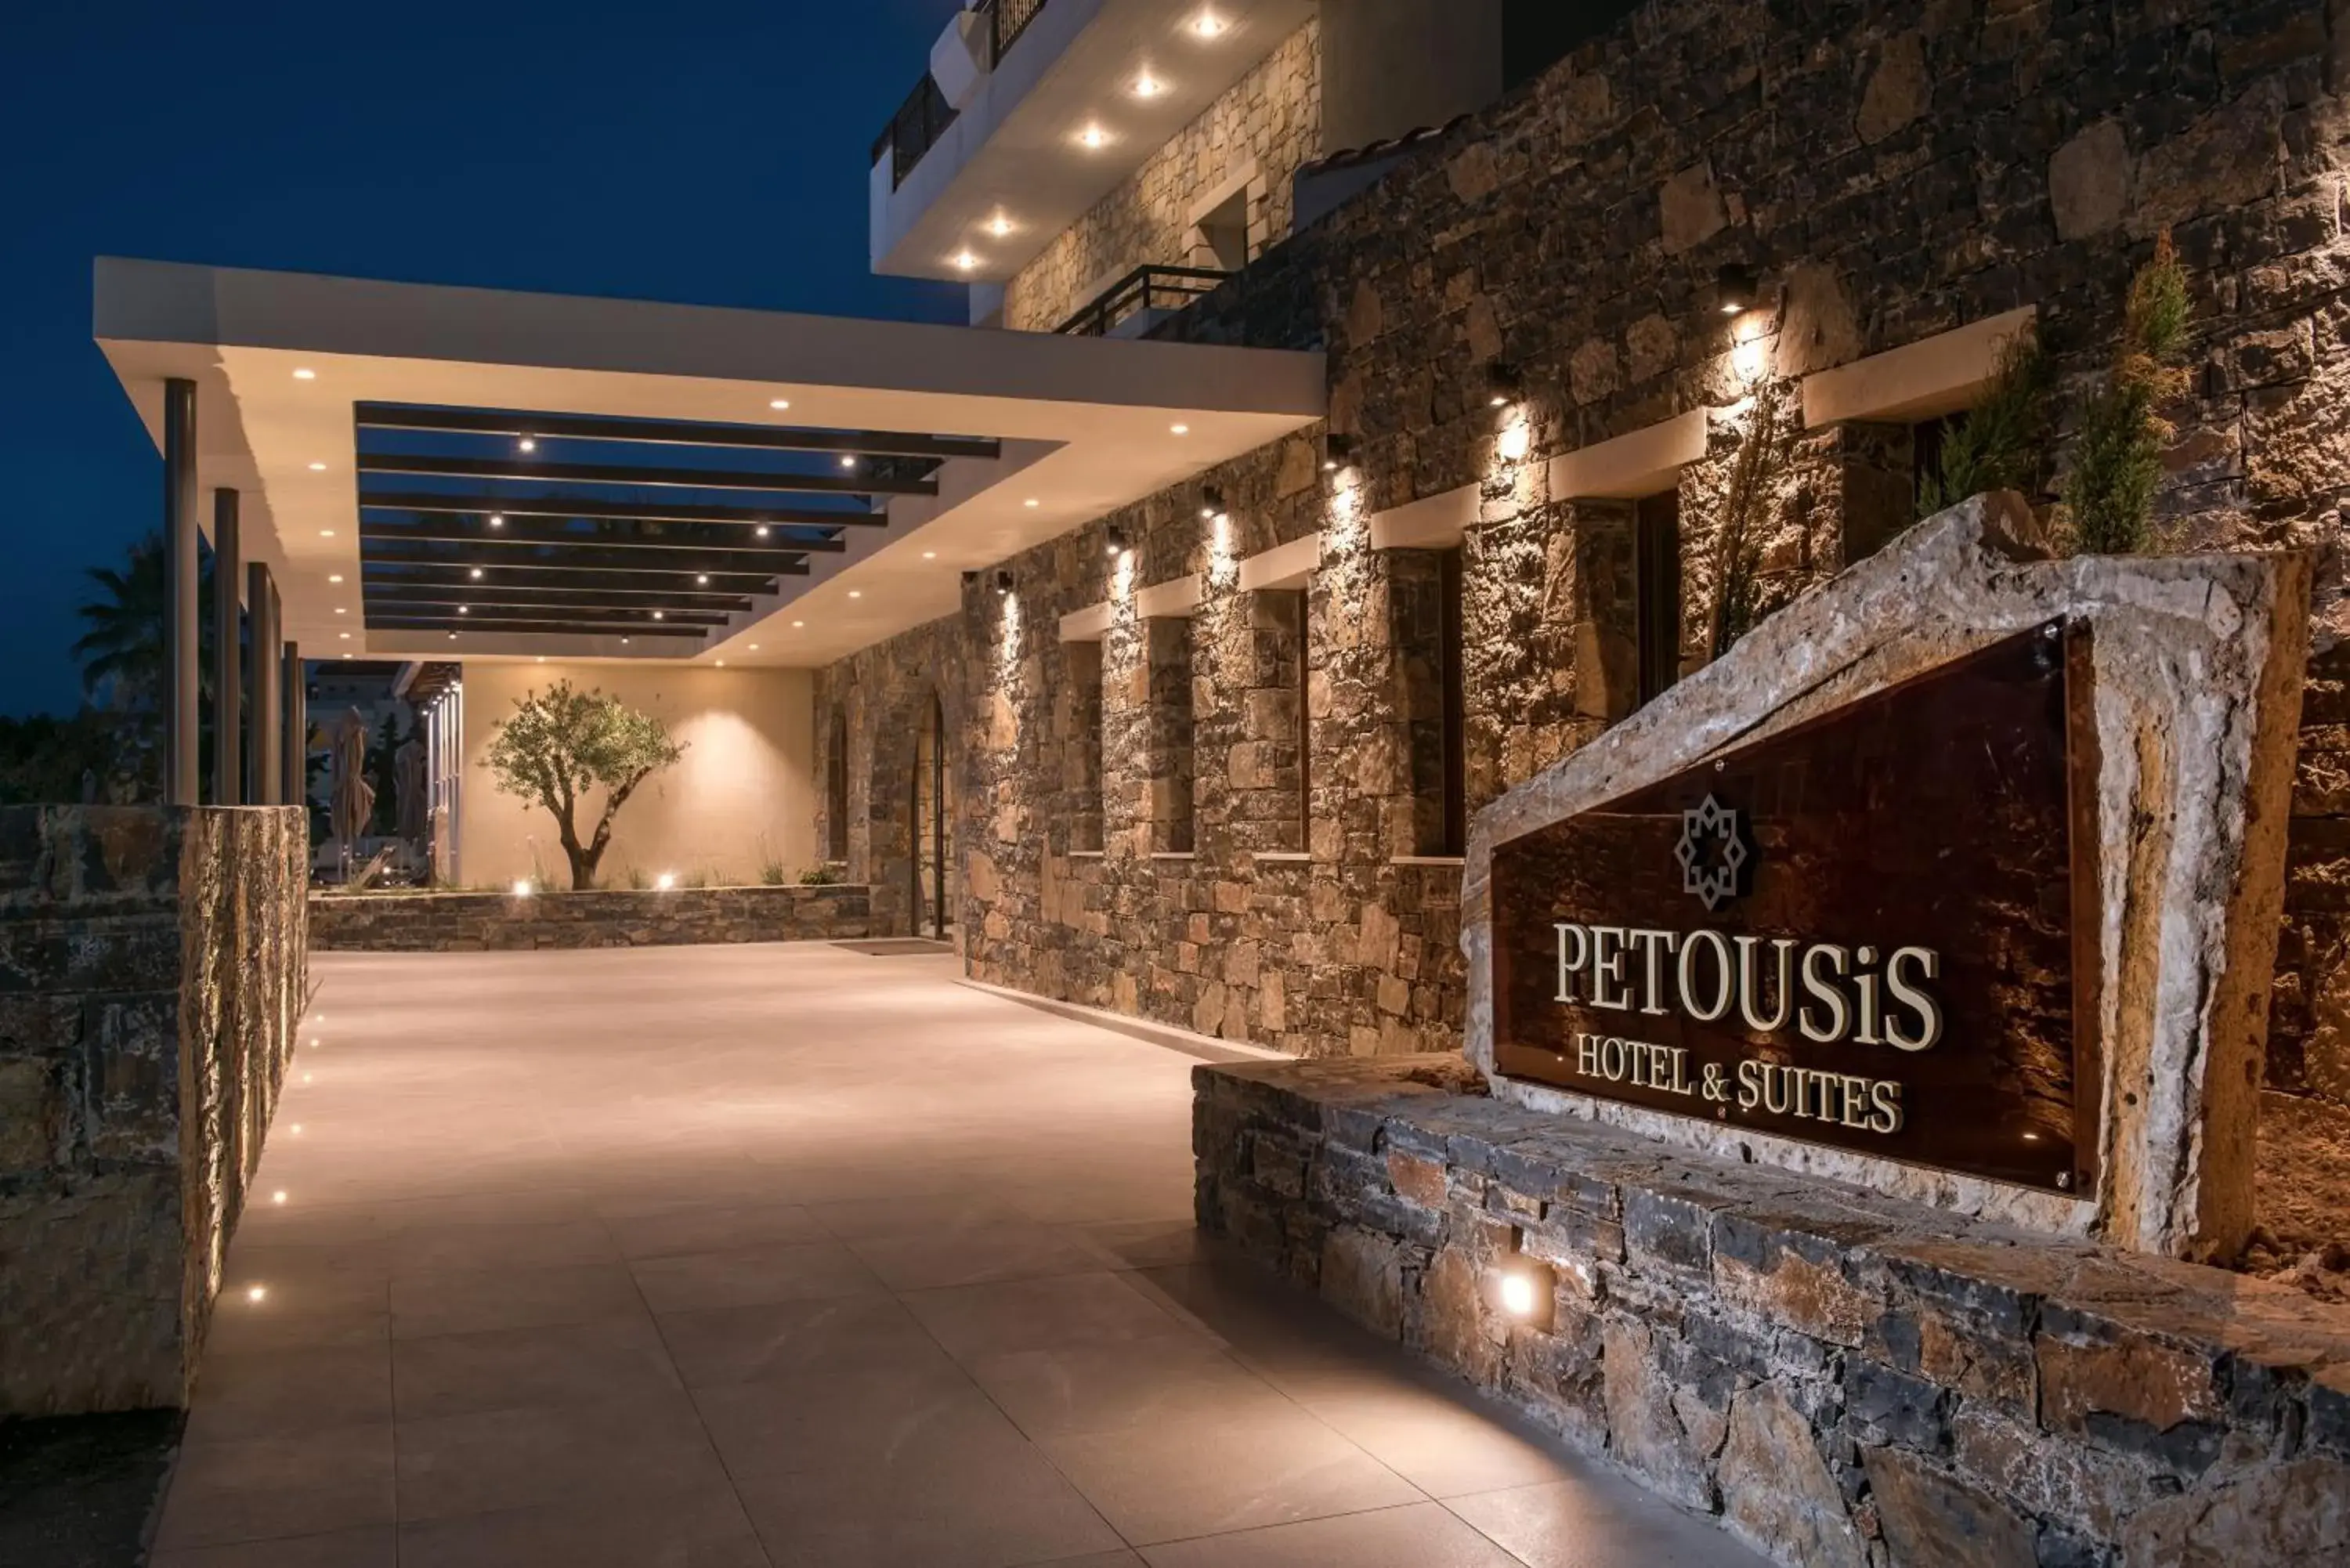 Property Building in Petousis Hotel & Suites